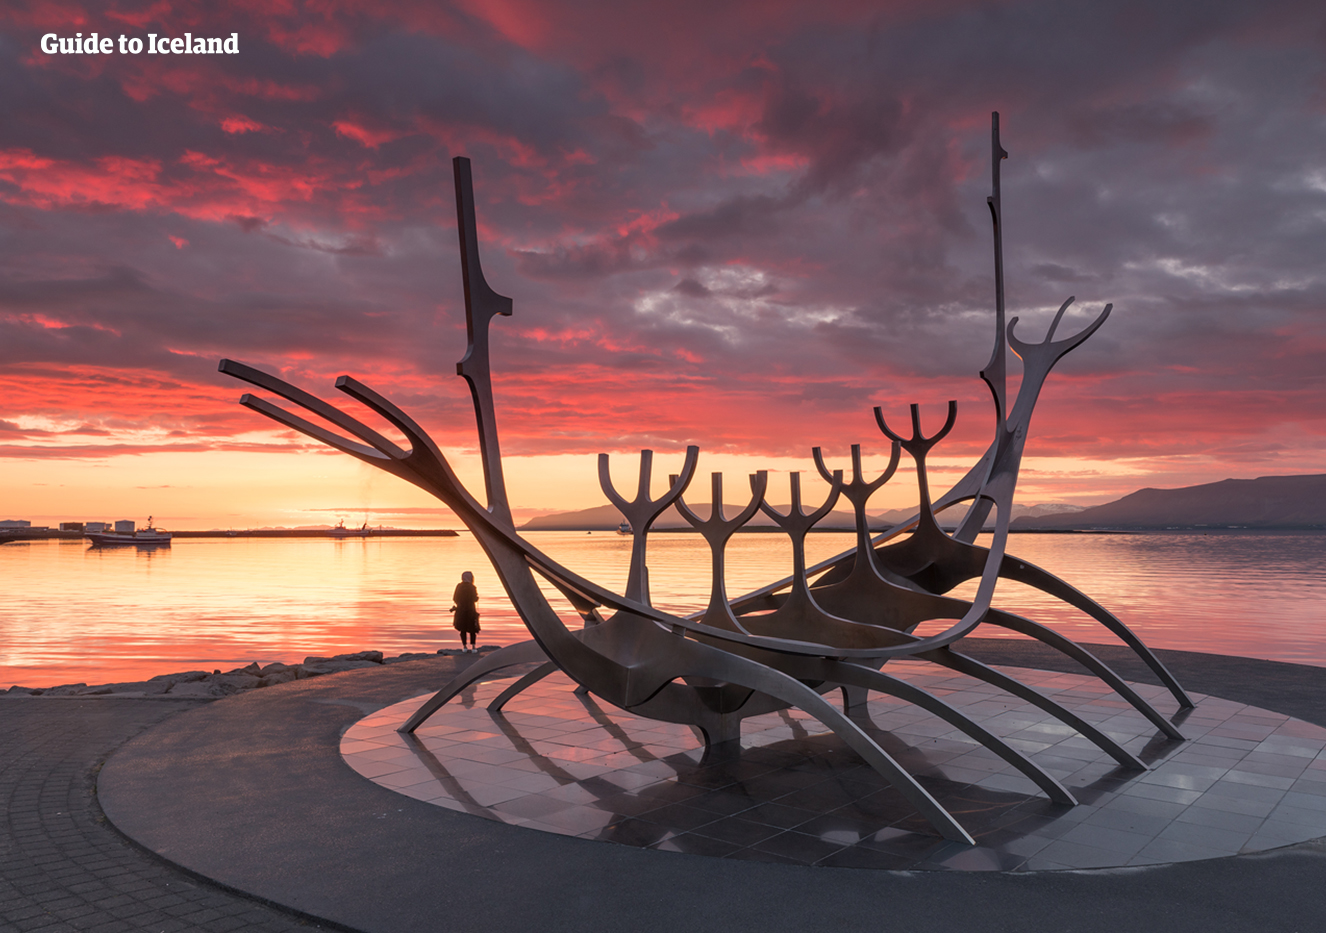 'The Sun Voyager', a metallic sculpture of a long ship, alludes to Iceland's history as a nation founded by Vikings.